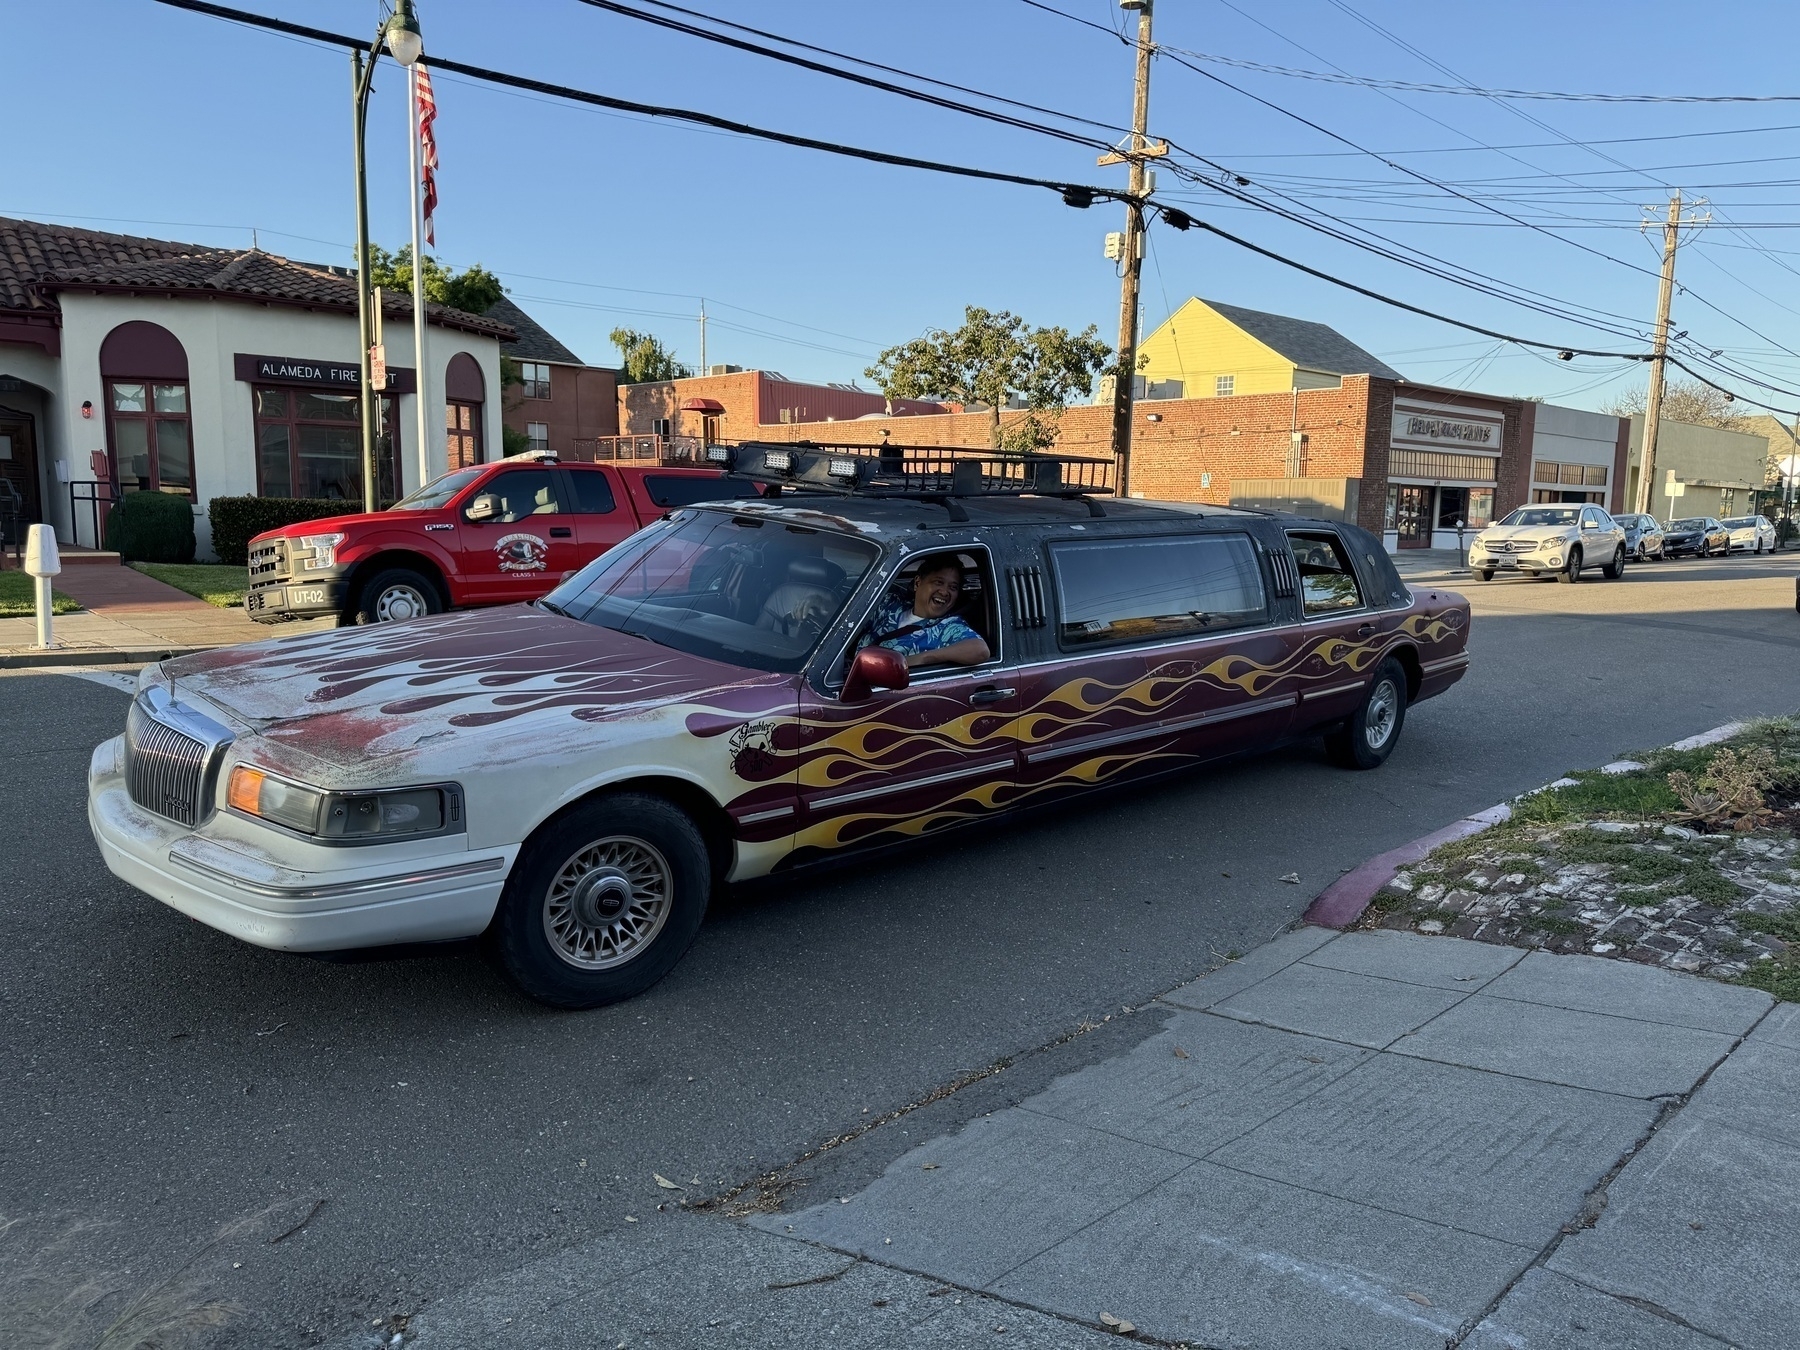 A shabby stretch limo painted with flames. We’re stylin’.